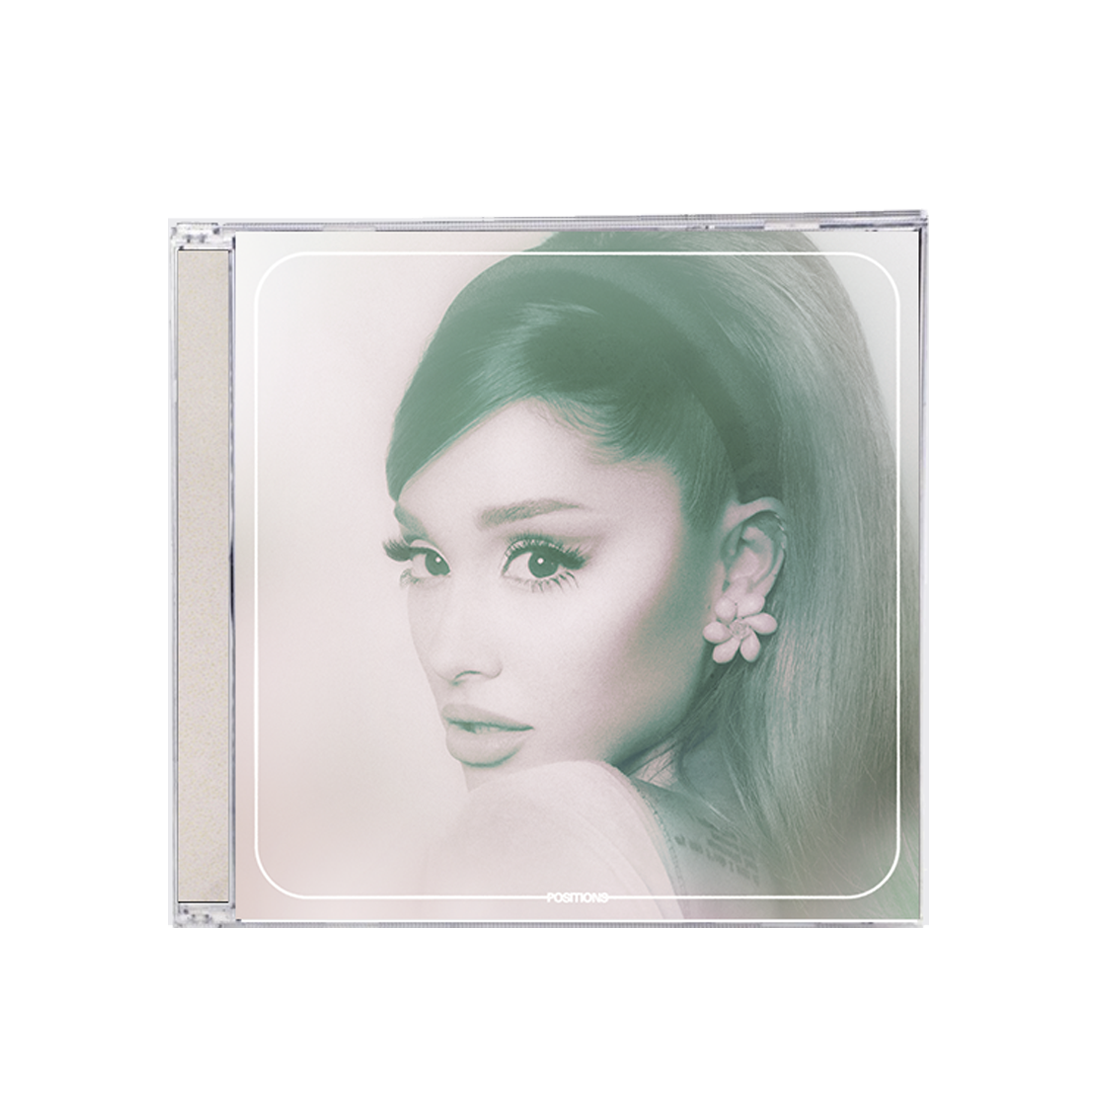 Positions Limited Edition CD 2 – Ariana Grande